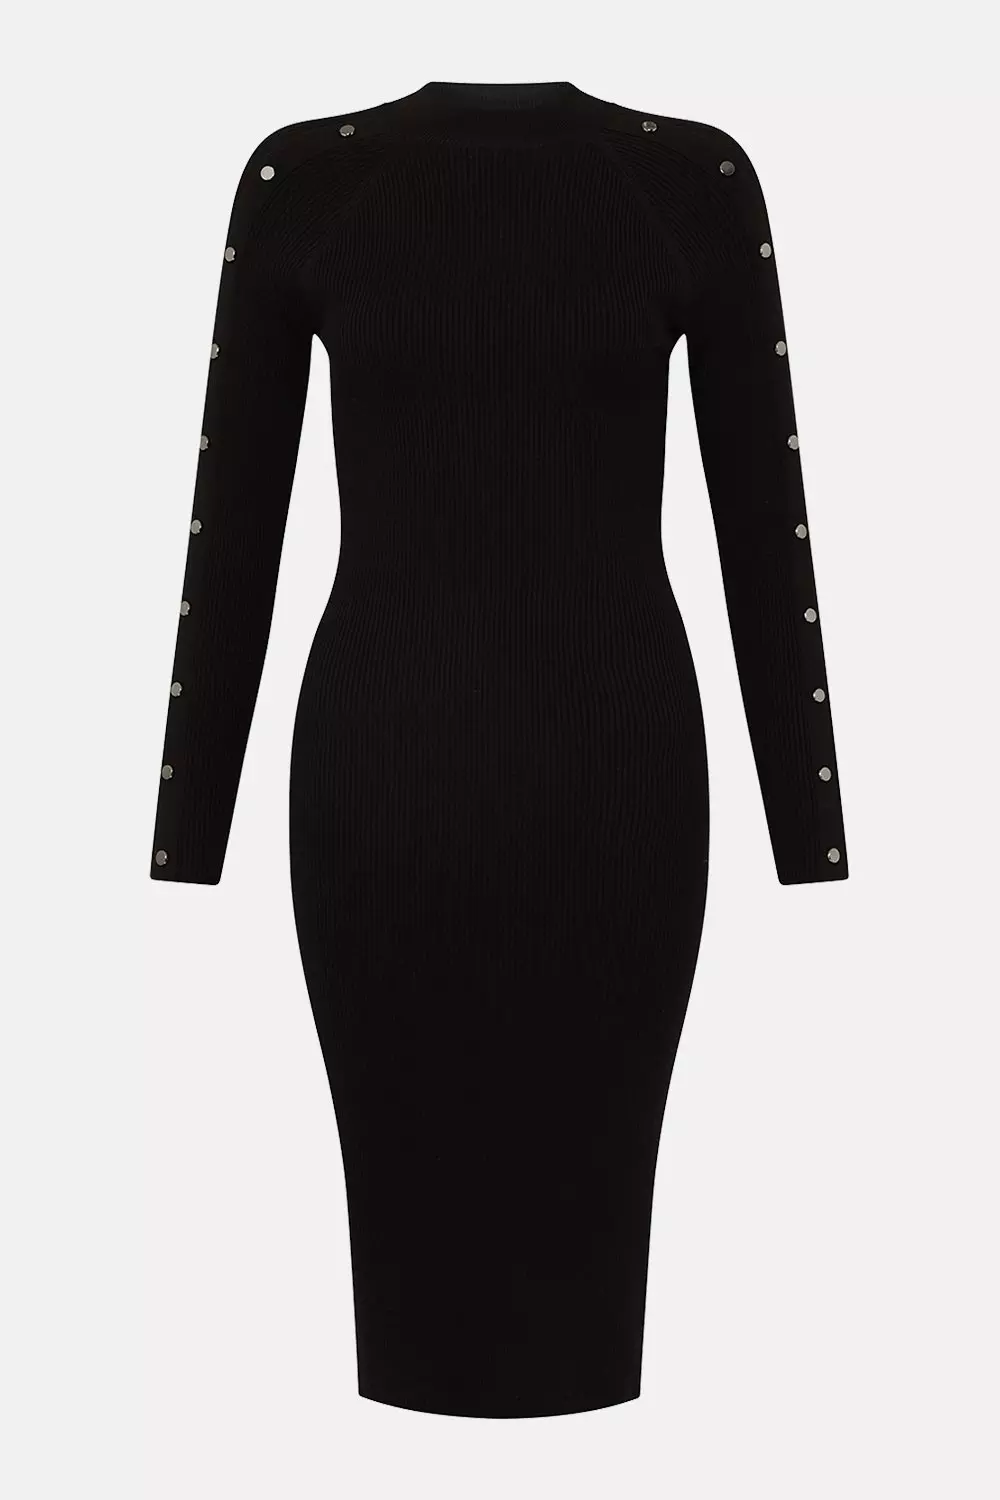  NOBRIM Women's Dress Solid Rib-Knit Bodycon Dress Dress for  Women (Color : Black, Size : XX-Small) : Clothing, Shoes & Jewelry